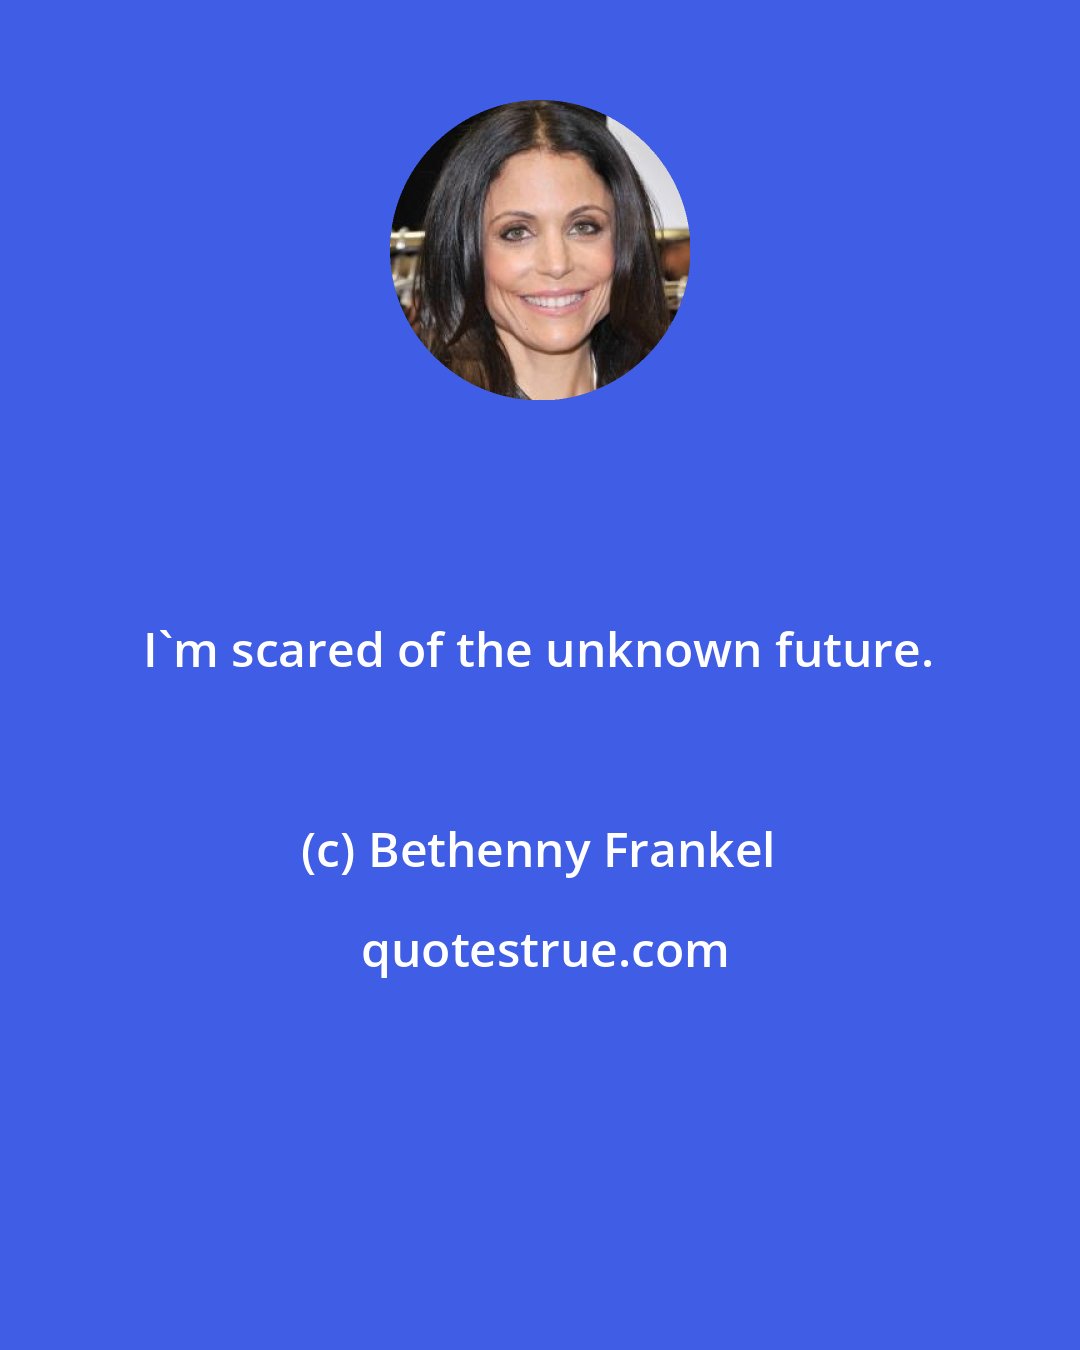 Bethenny Frankel: I'm scared of the unknown future.